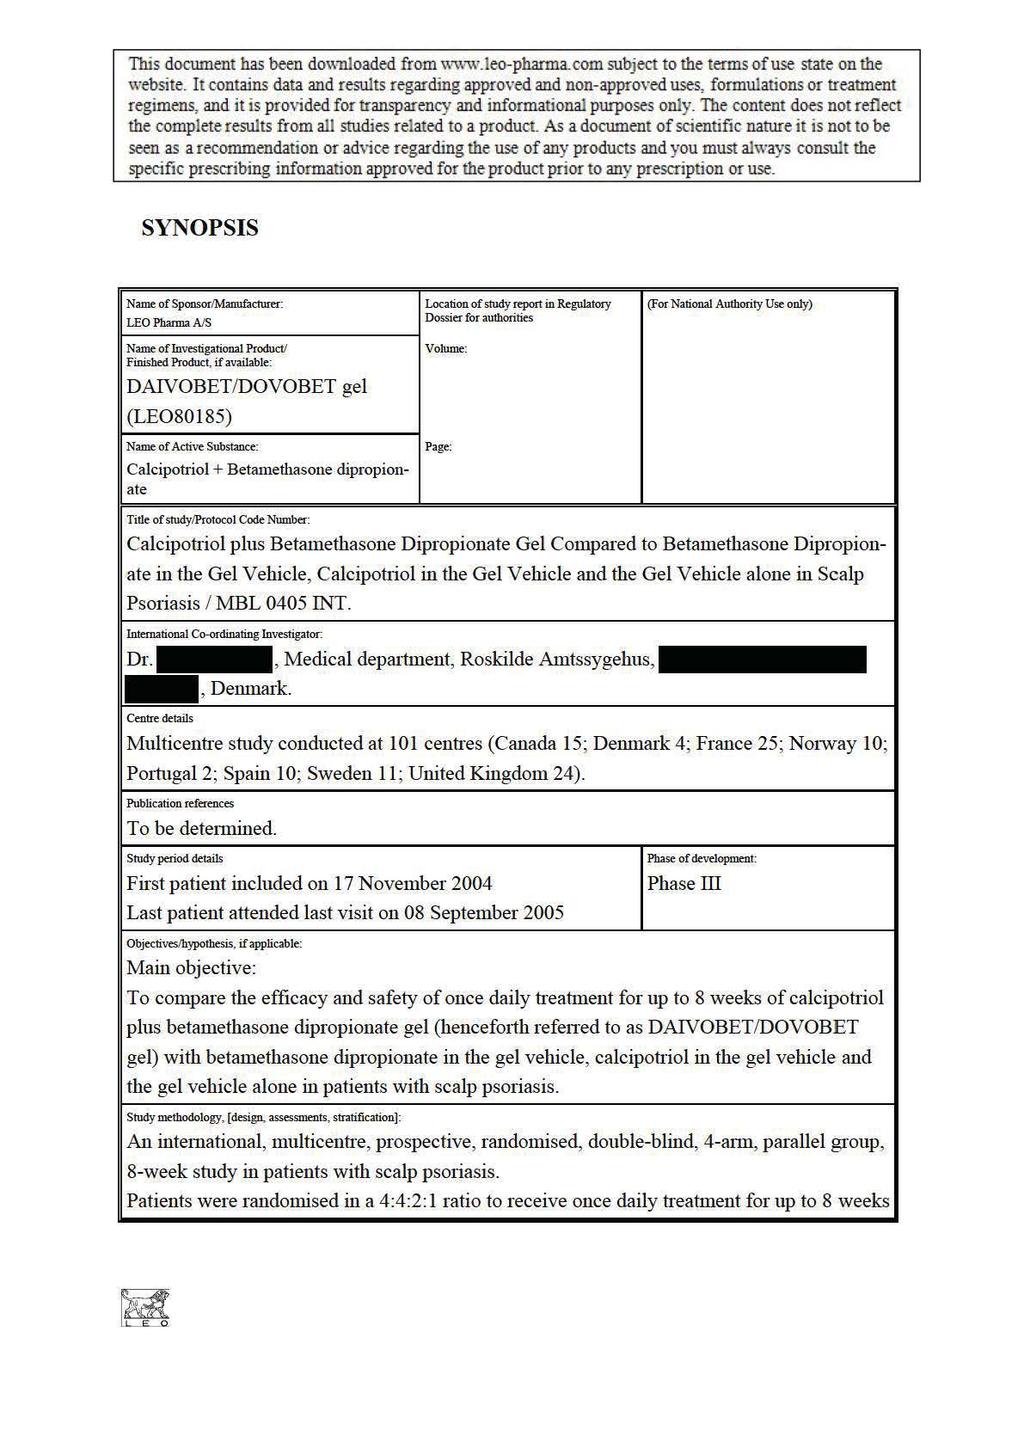 This document has been downloaded from W"\vw.leo-pharma.com subject to the tennsofuse state on the website.